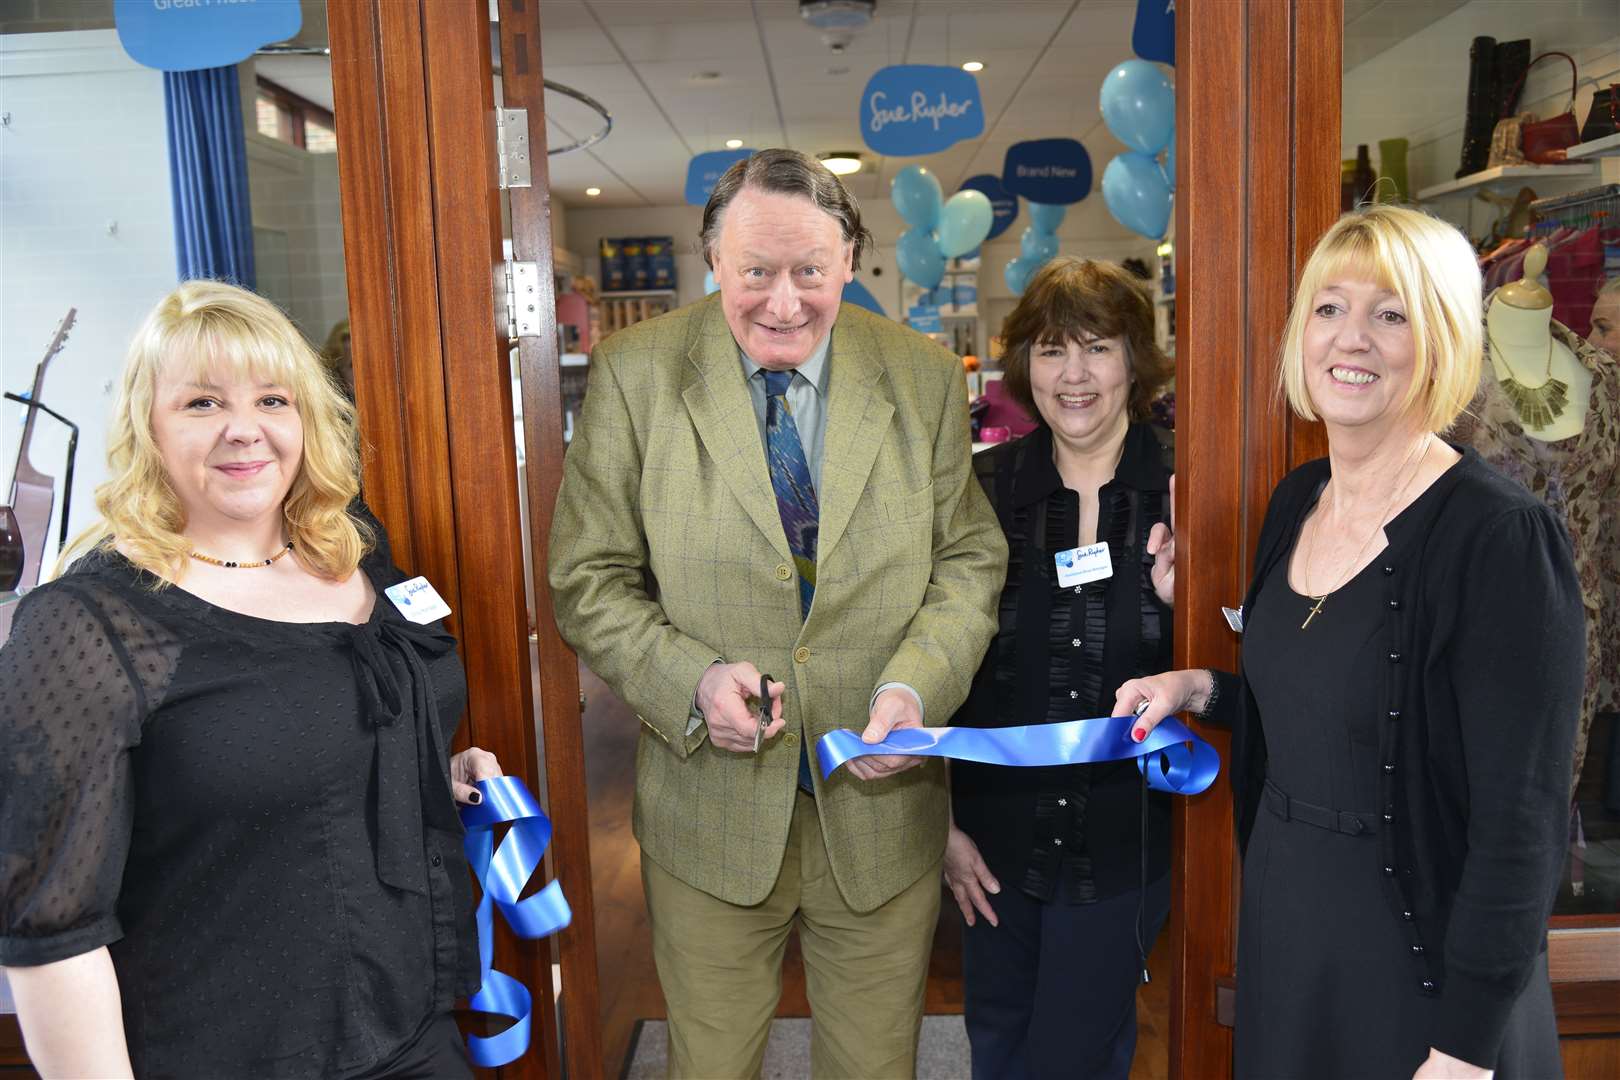 Sir John opening the Sue Ryder charity shop in Kings Hill